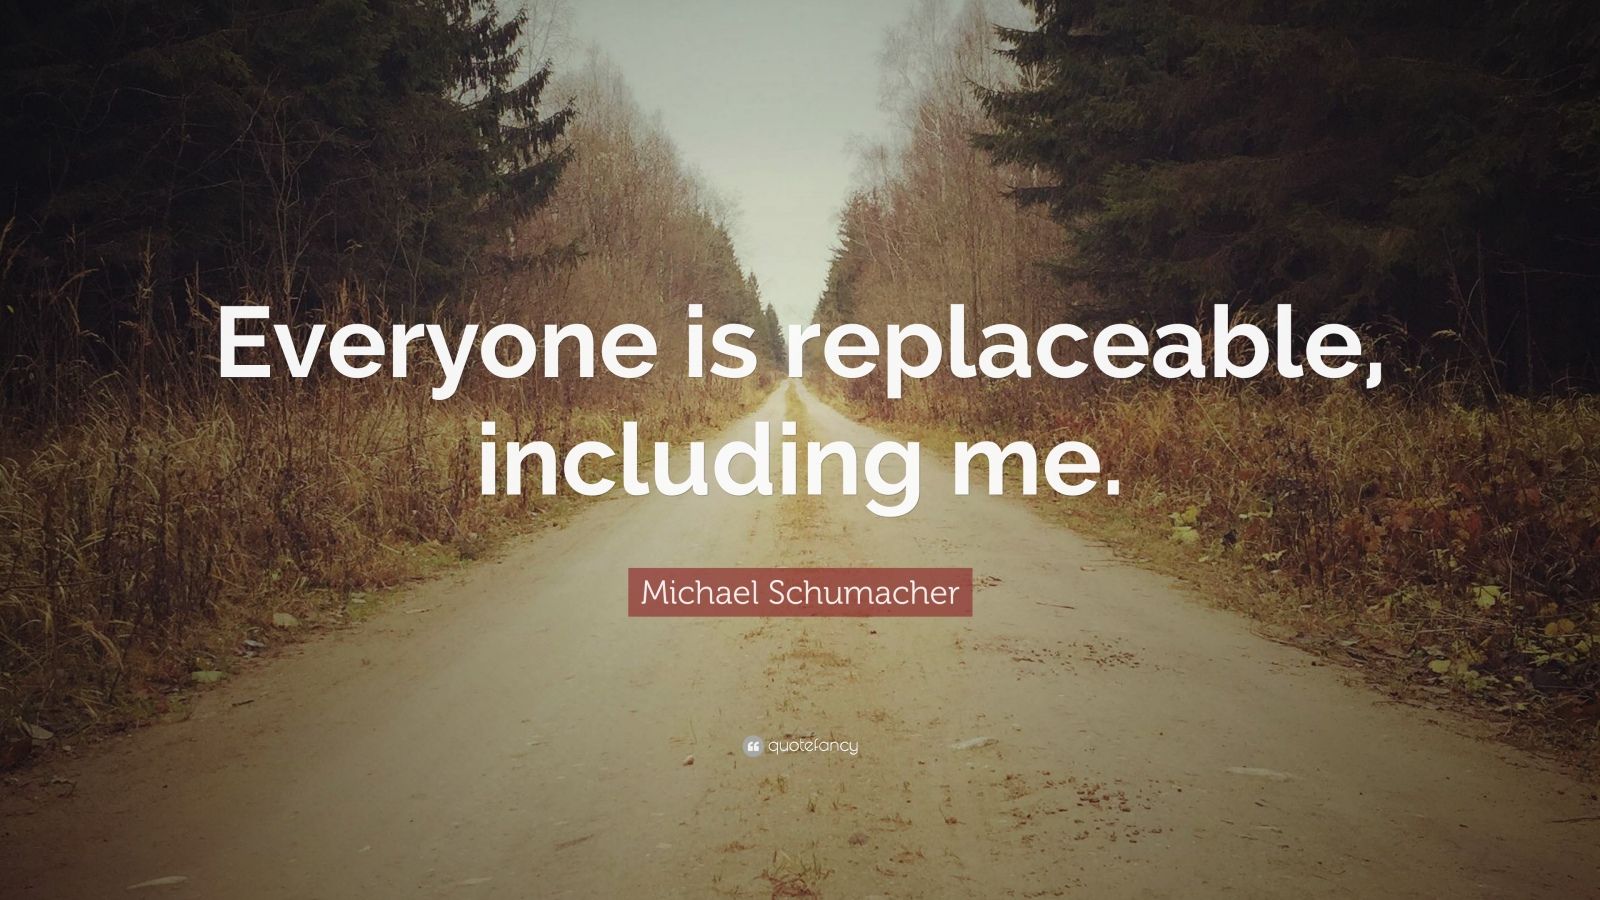 Michael Schumacher Quote “everyone Is Replaceable Including Me” 7 Wallpapers Quotefancy 